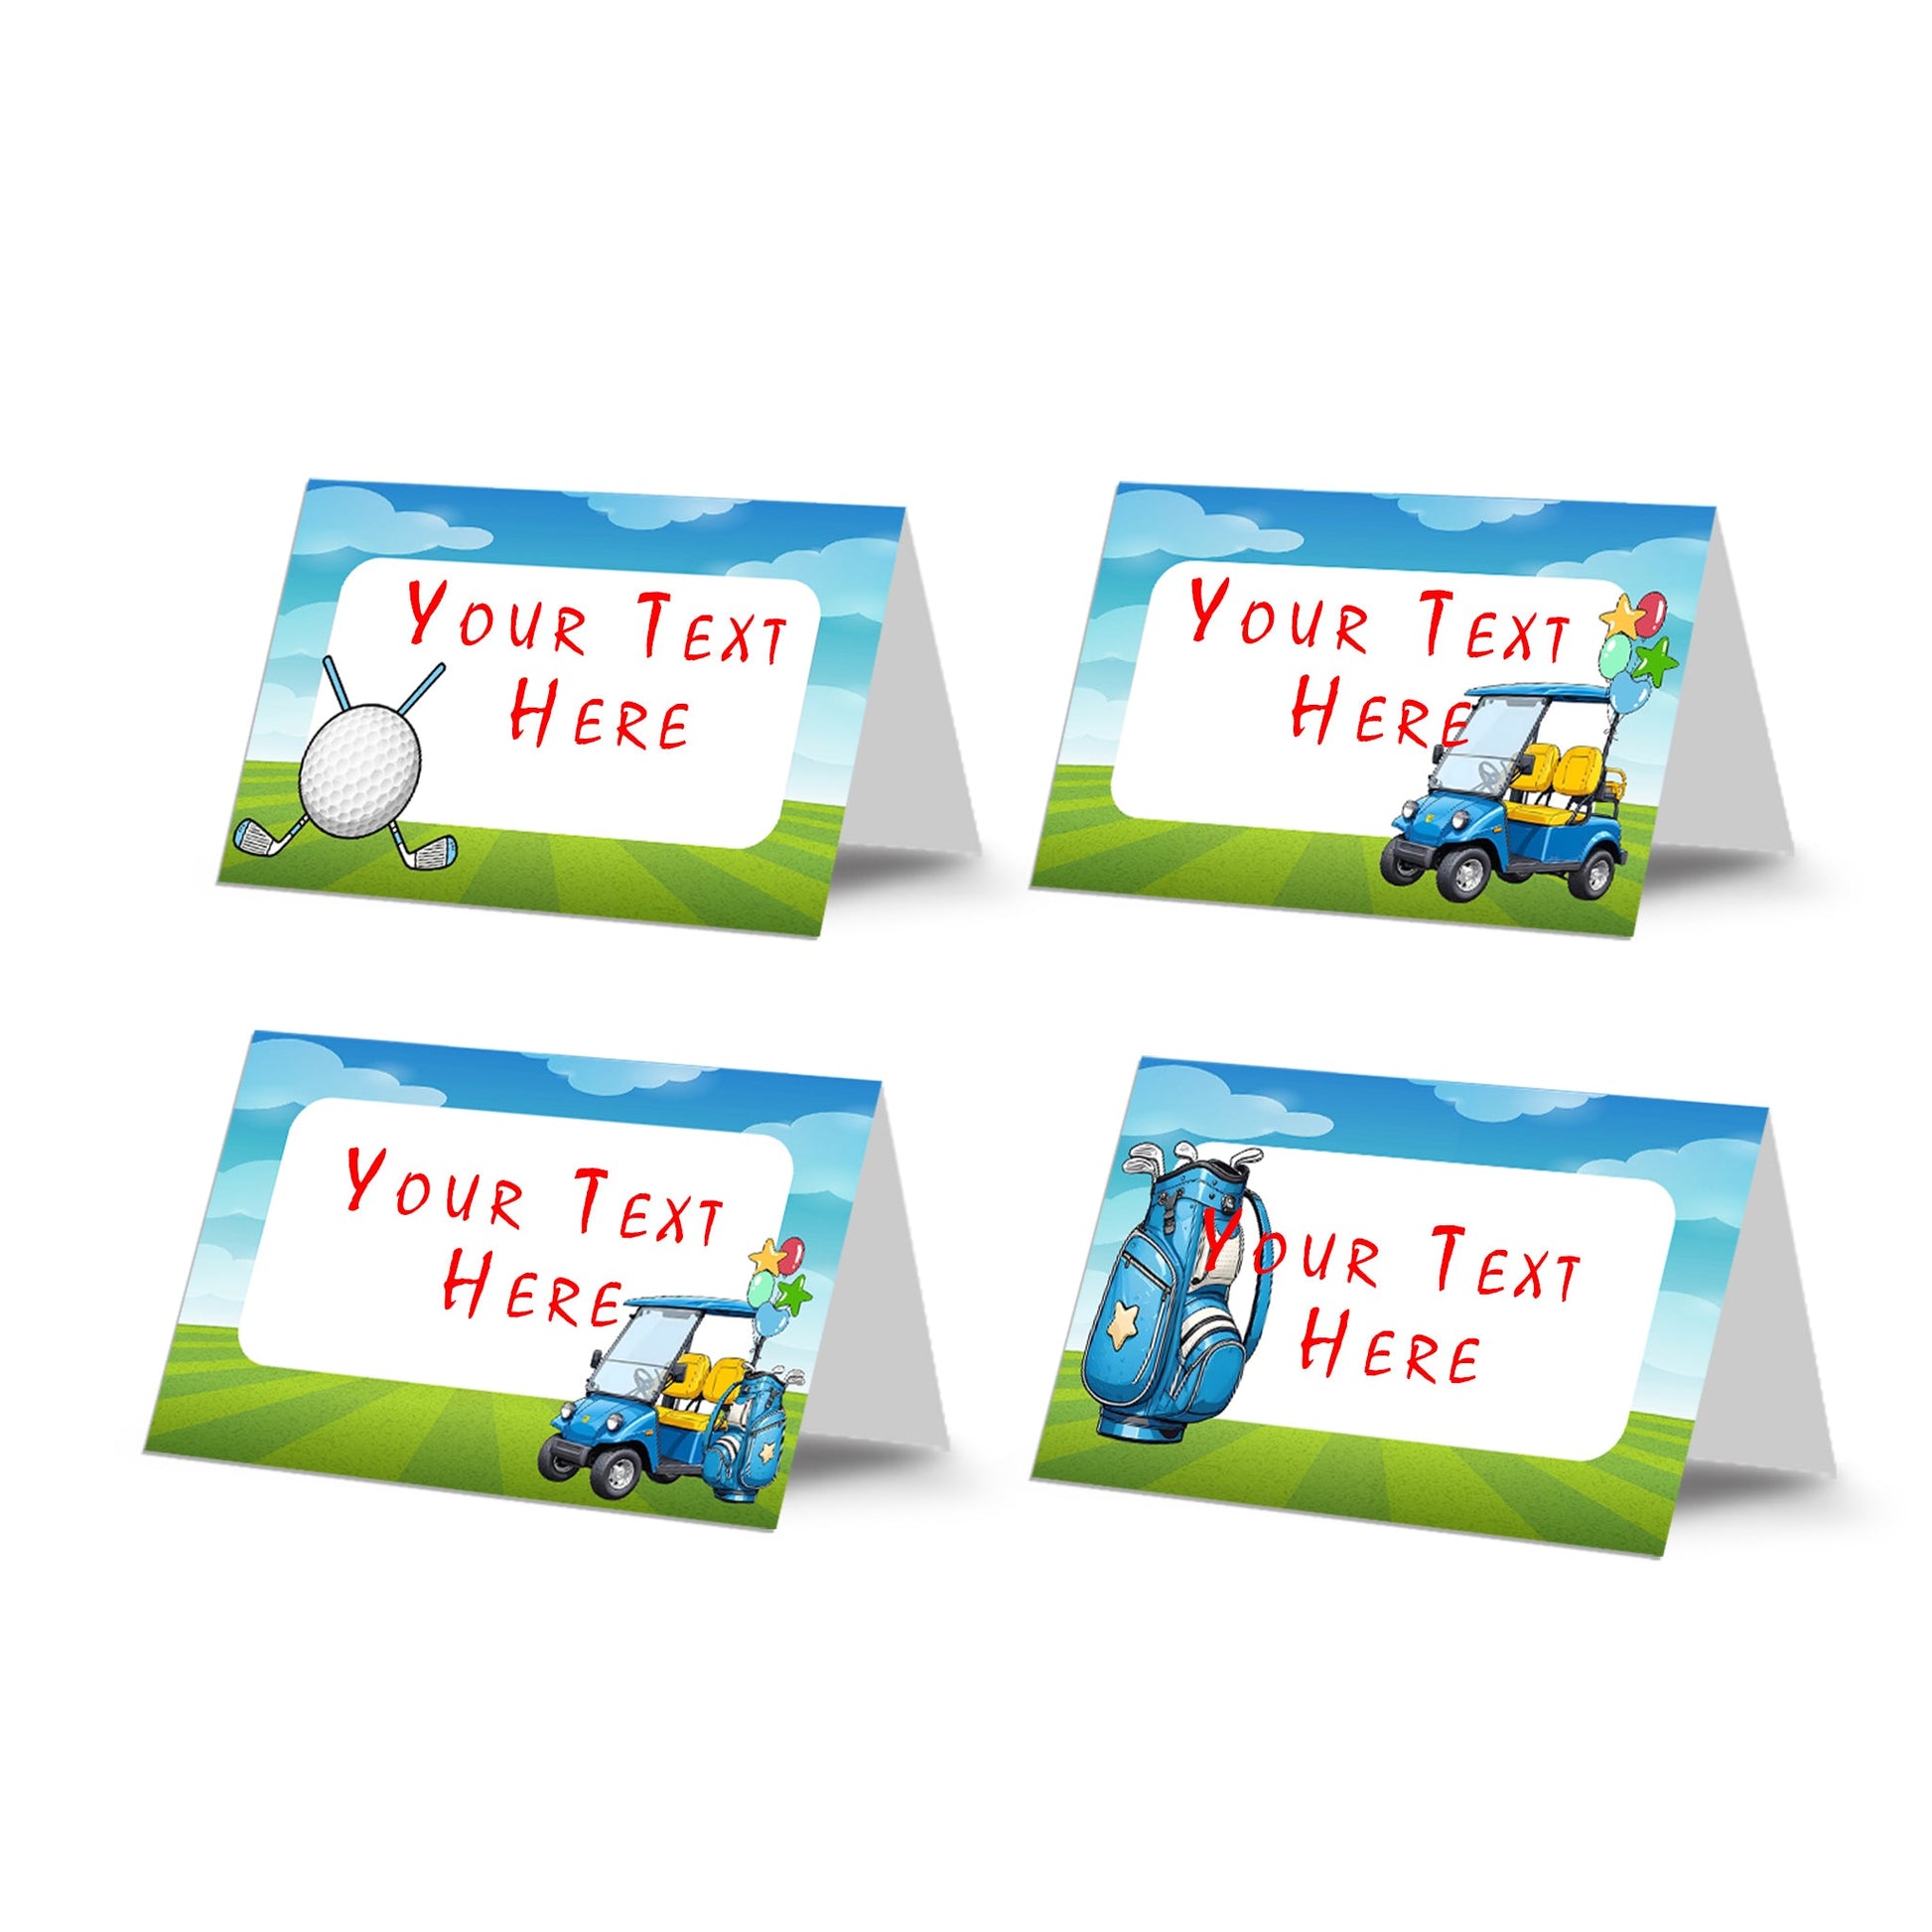 Mini Golf Food Cards: Personalized food cards with mini golf course designs